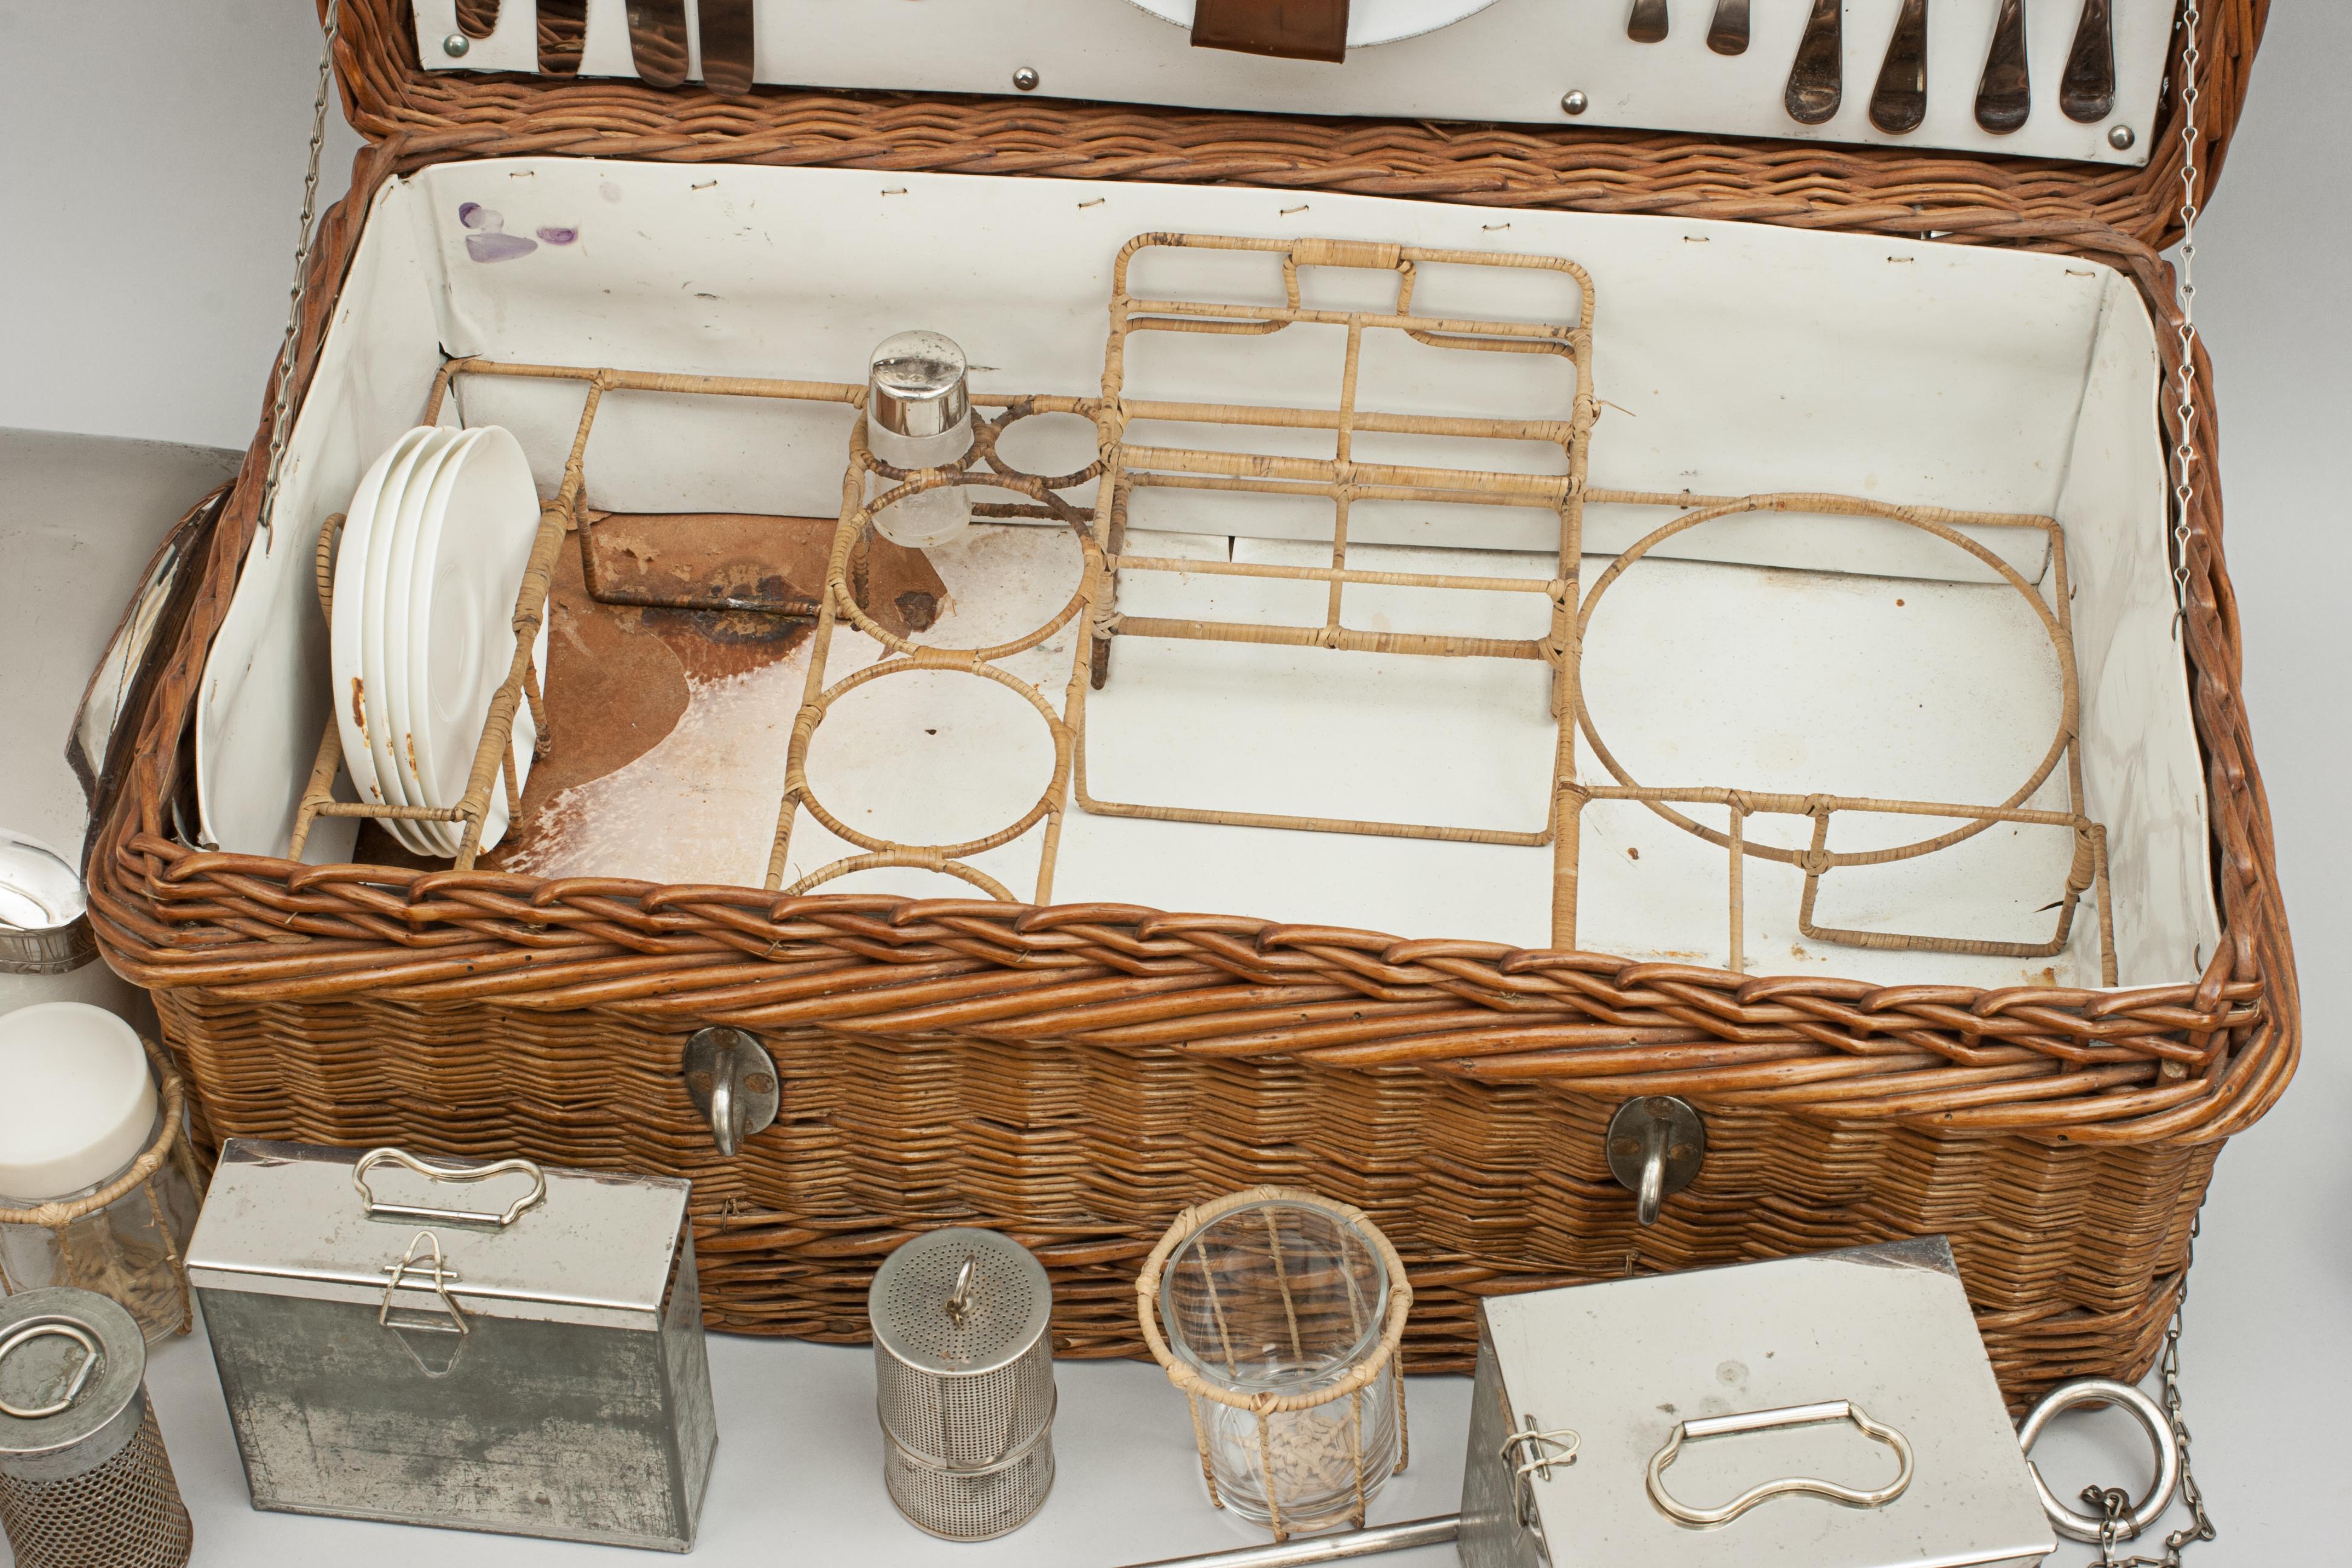 Early 20th Century Vintage Wicker Picnic Basket, Four Person Picnic Set